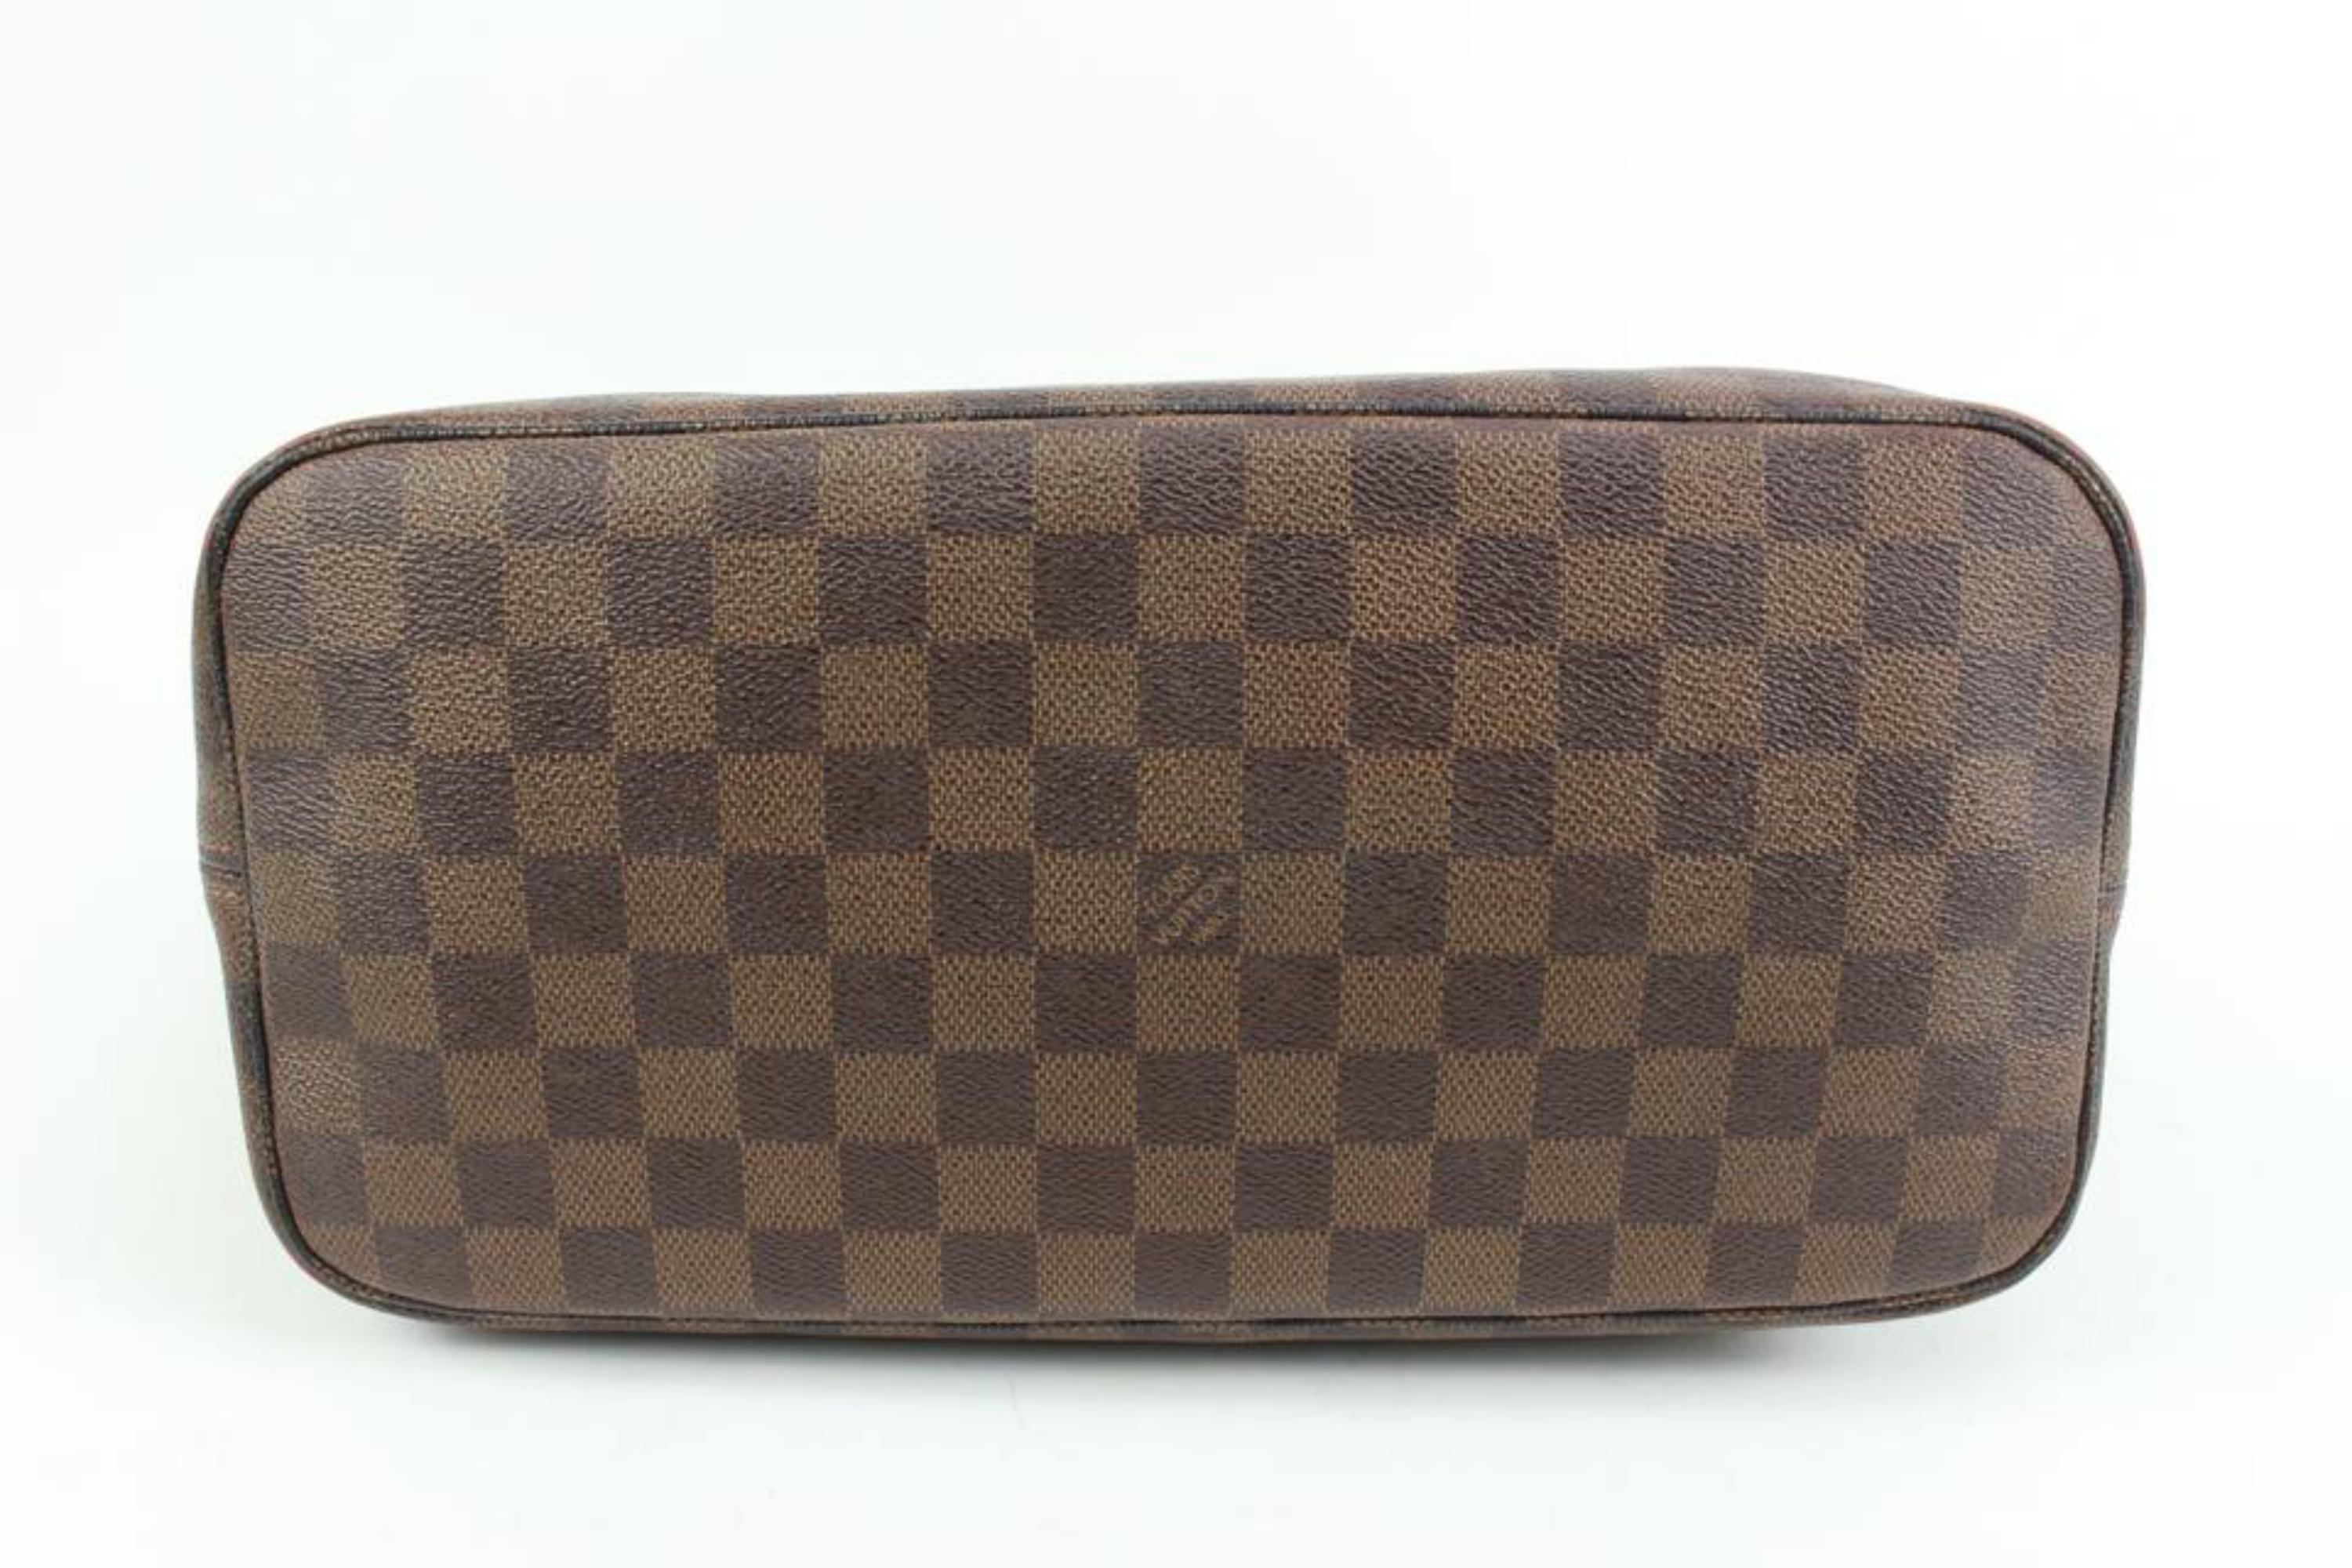 Louis Vuitton Damier Ebene Neverfull MM Tote Bag 95lv318s In Fair Condition For Sale In Dix hills, NY